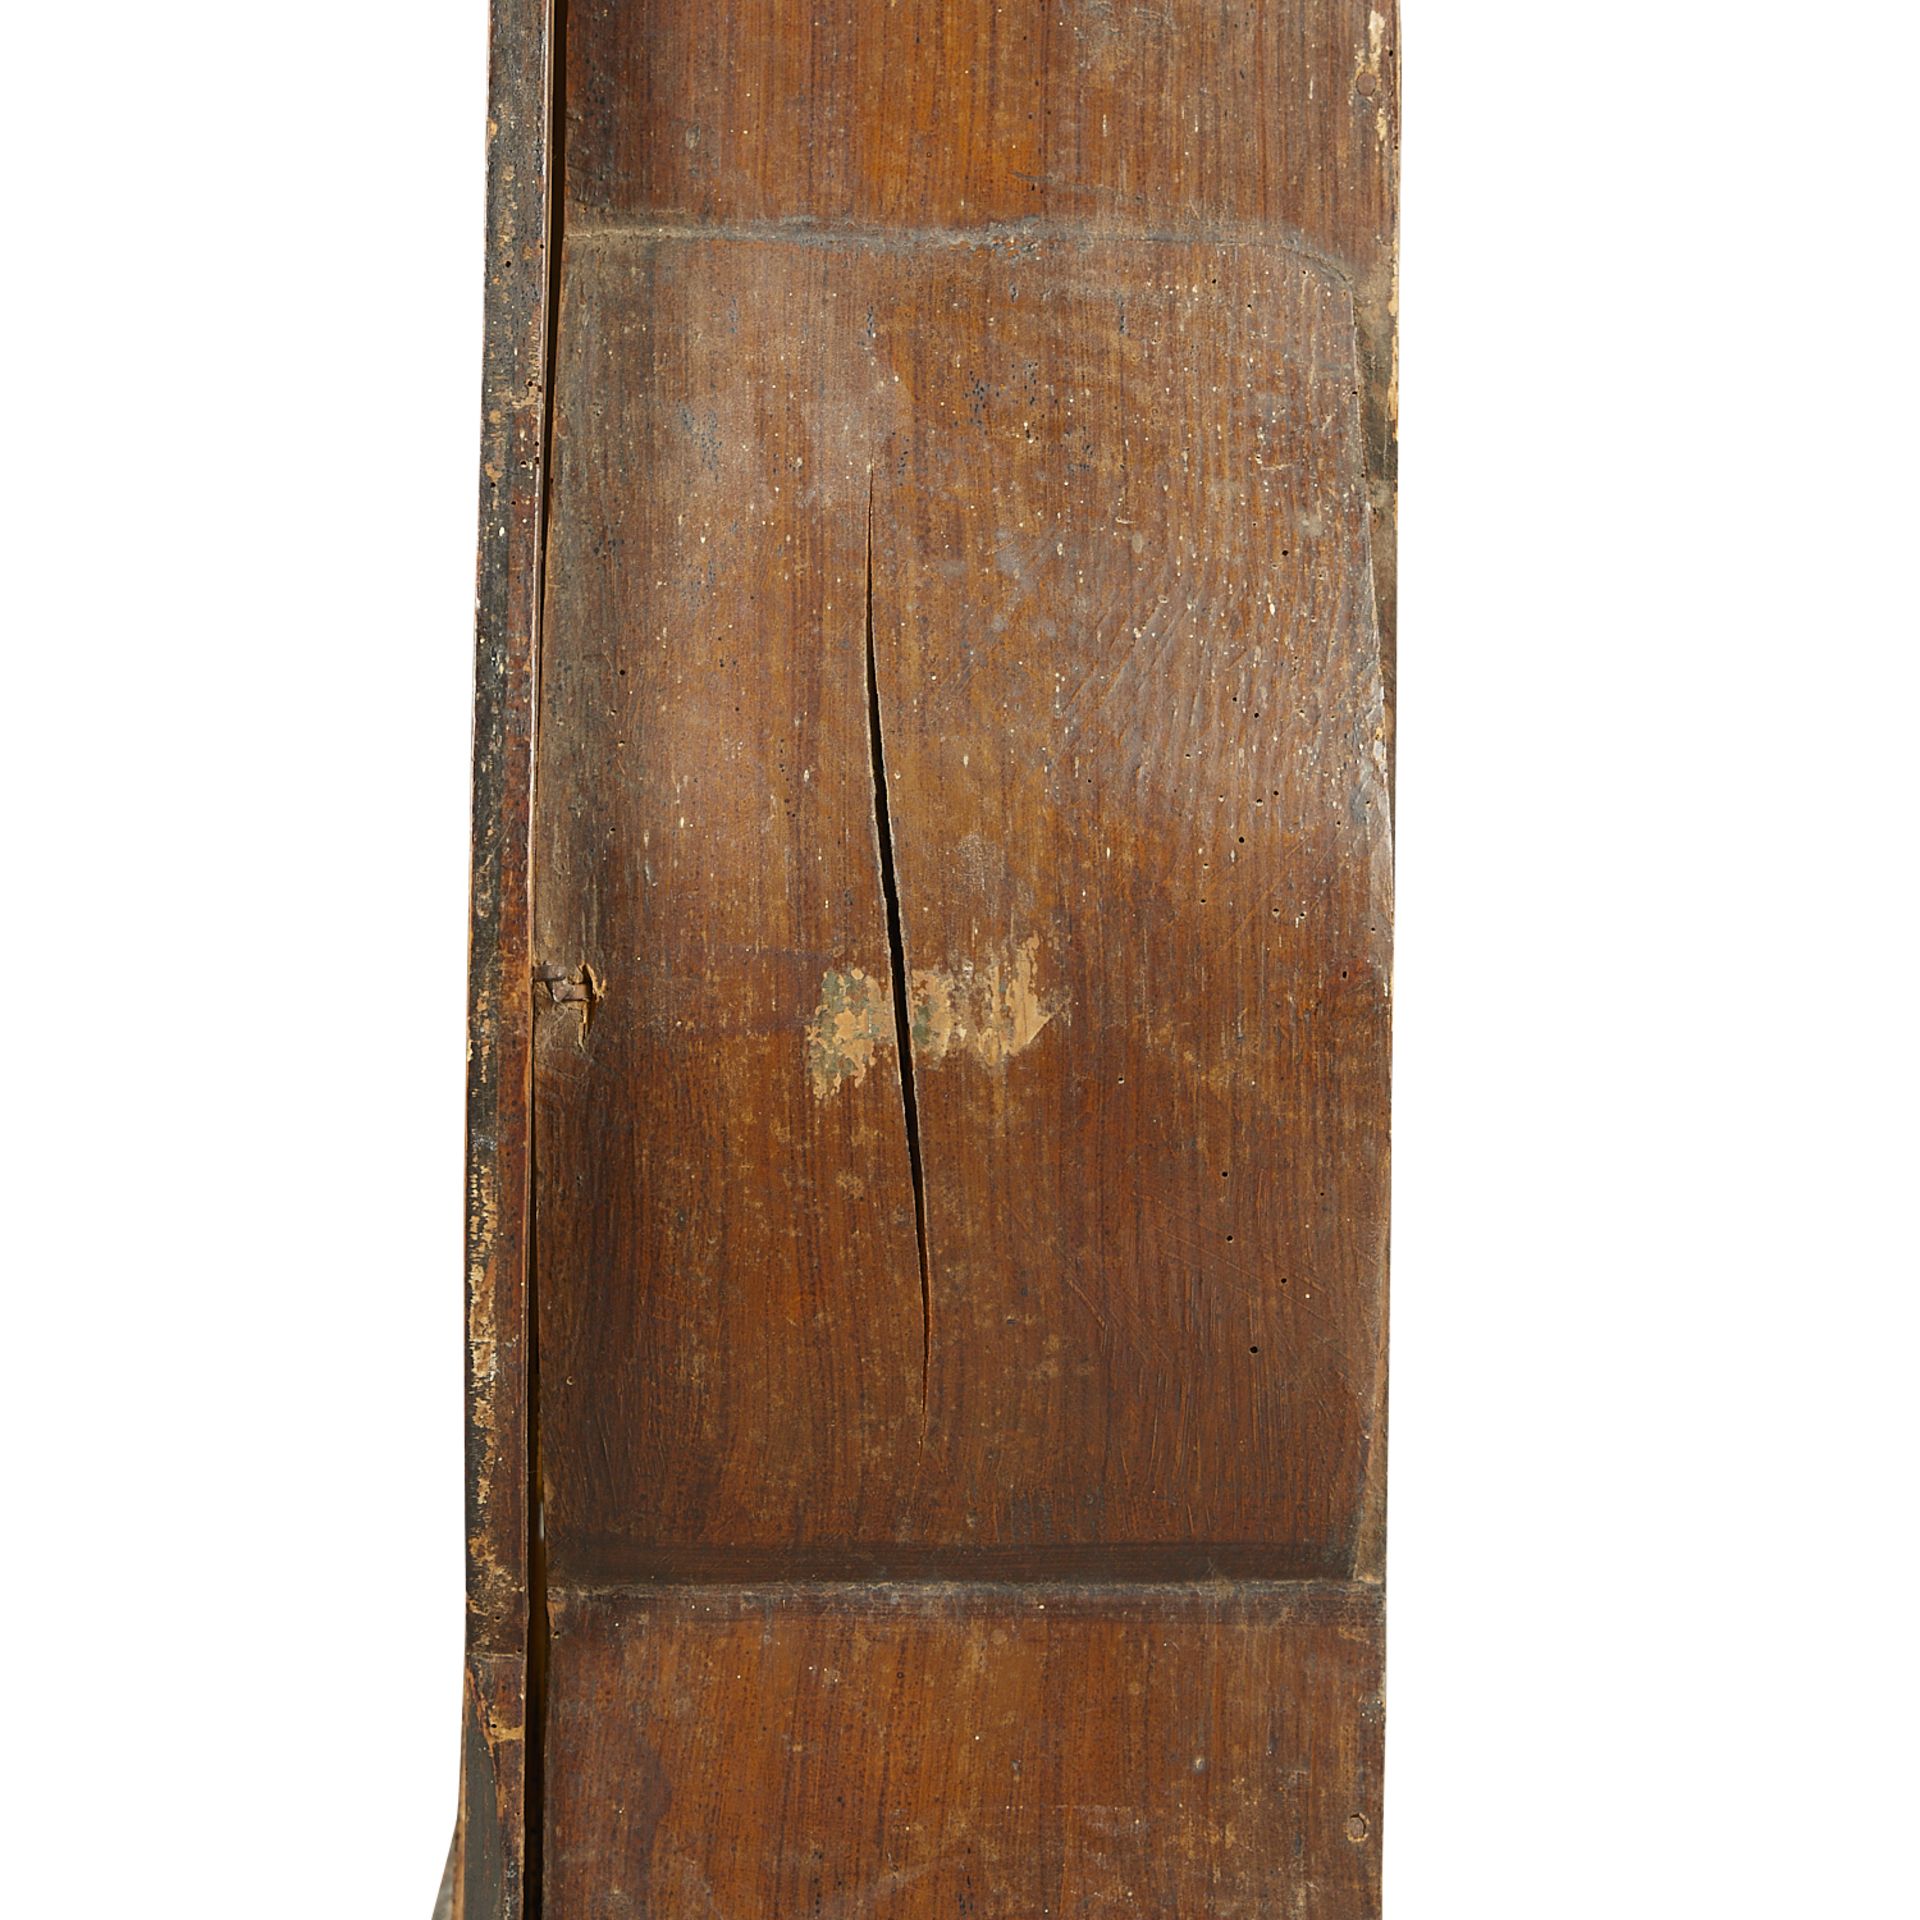 Delarue French Country Painted Grandfather Clock - Image 16 of 22